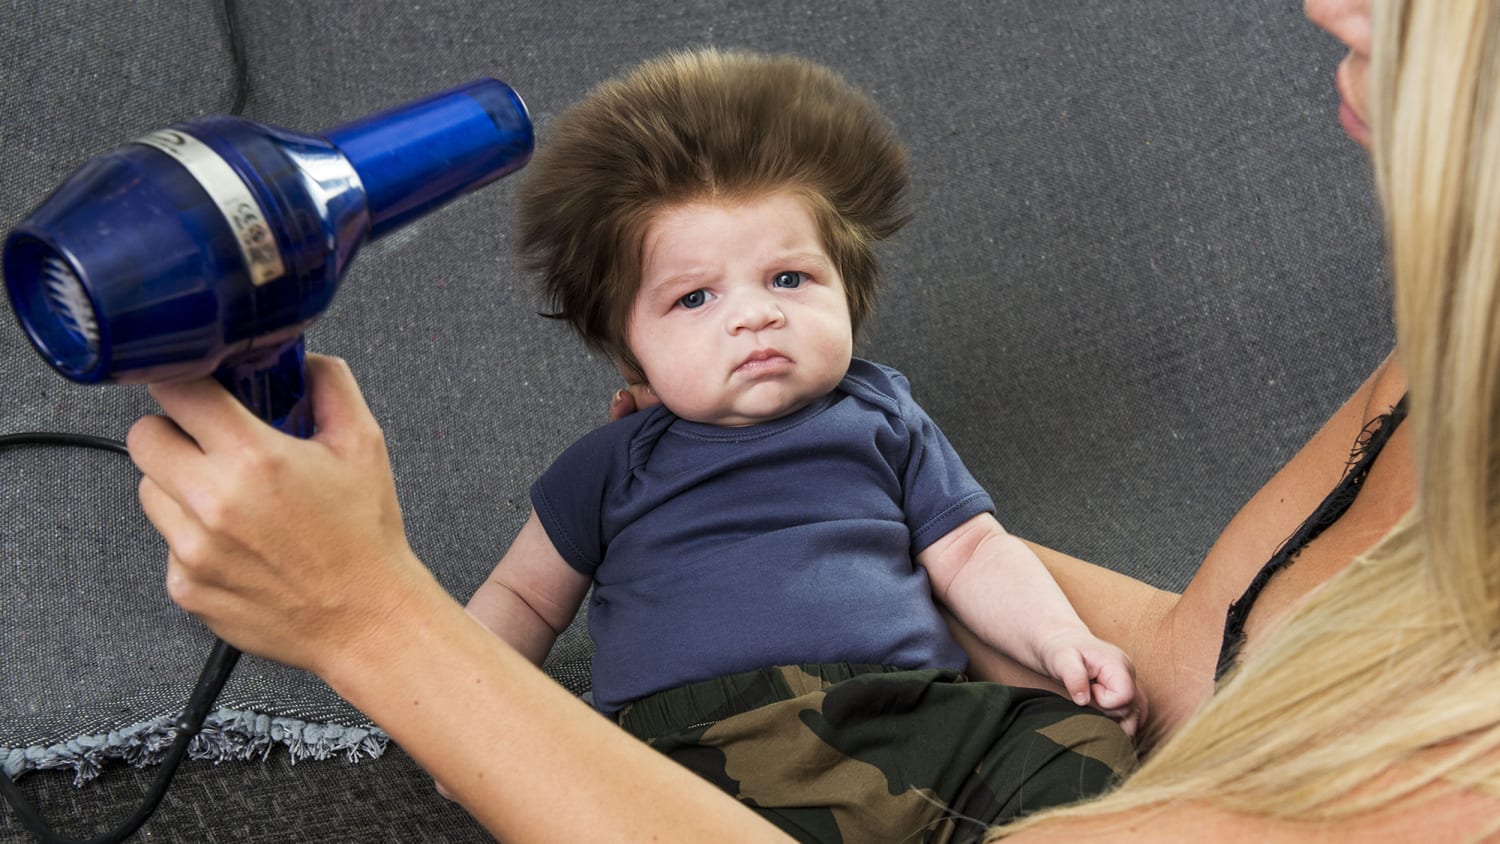 Meet The 9 Week Old Baby Whos Going Viral For His Full Head Of